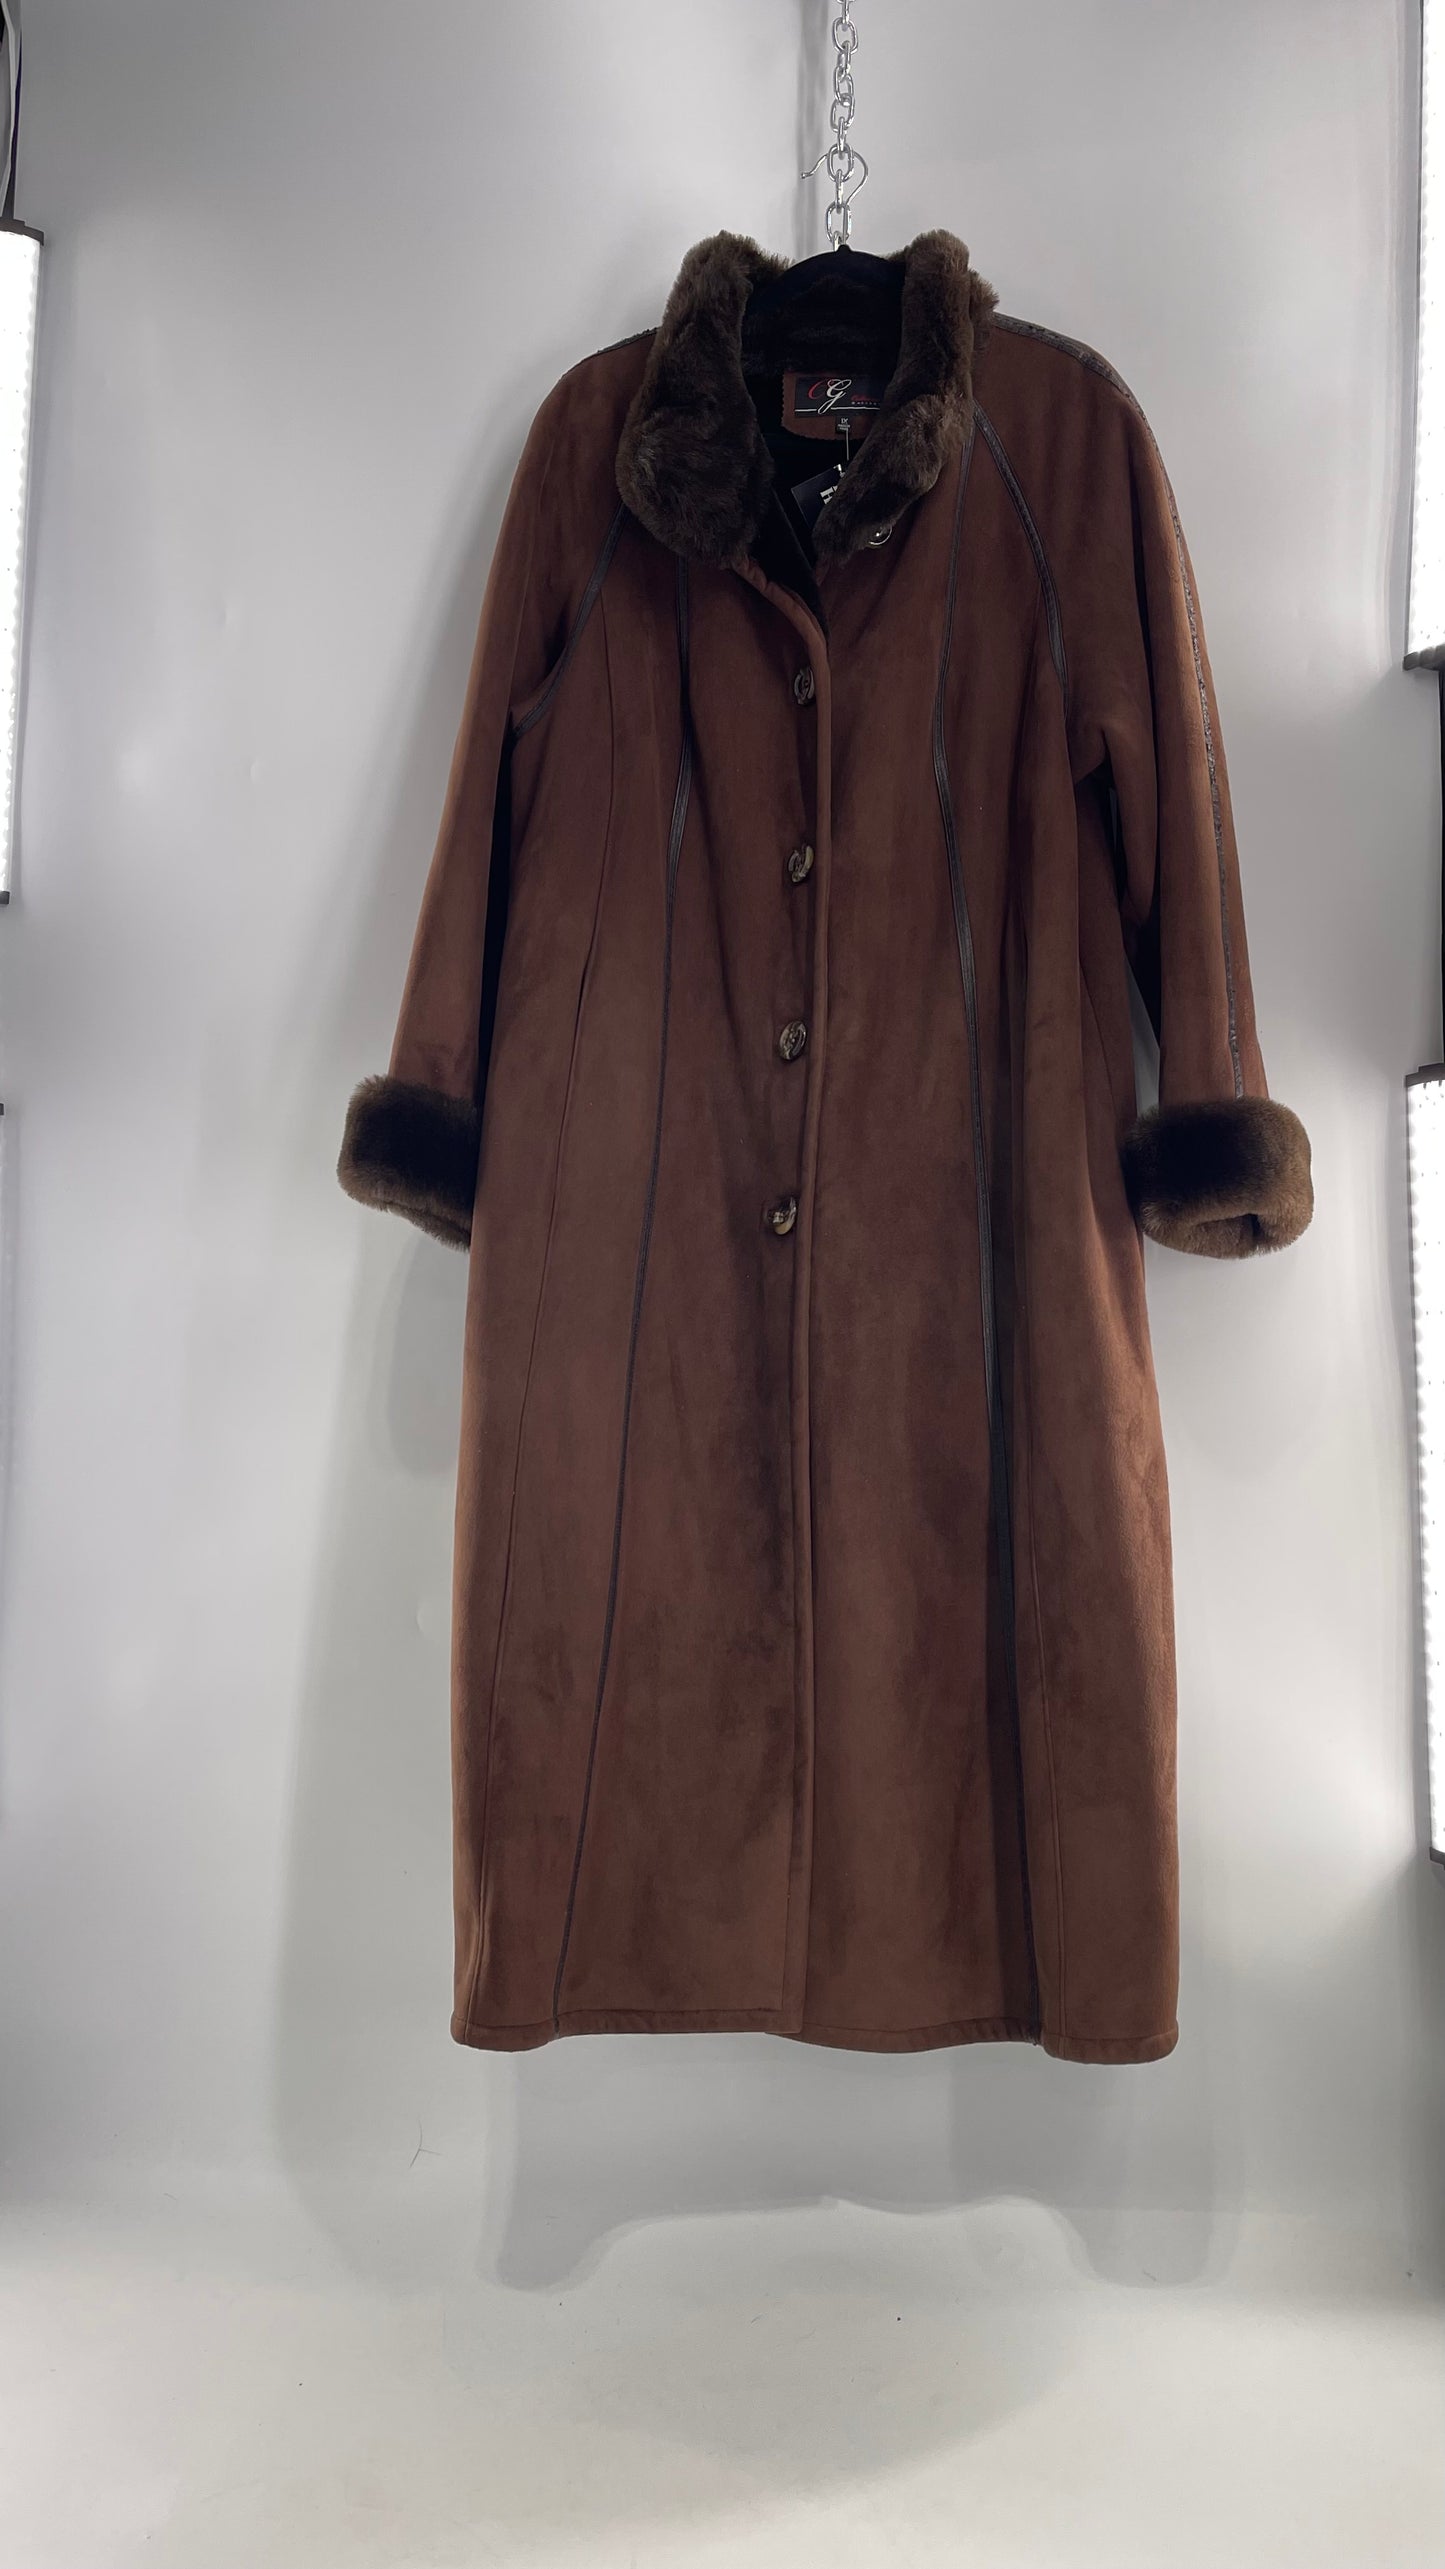 Vintage CG Collection Brown Coat with Faux Leather Piping and Faux Fur Cuffs and Collar (C)(XL)